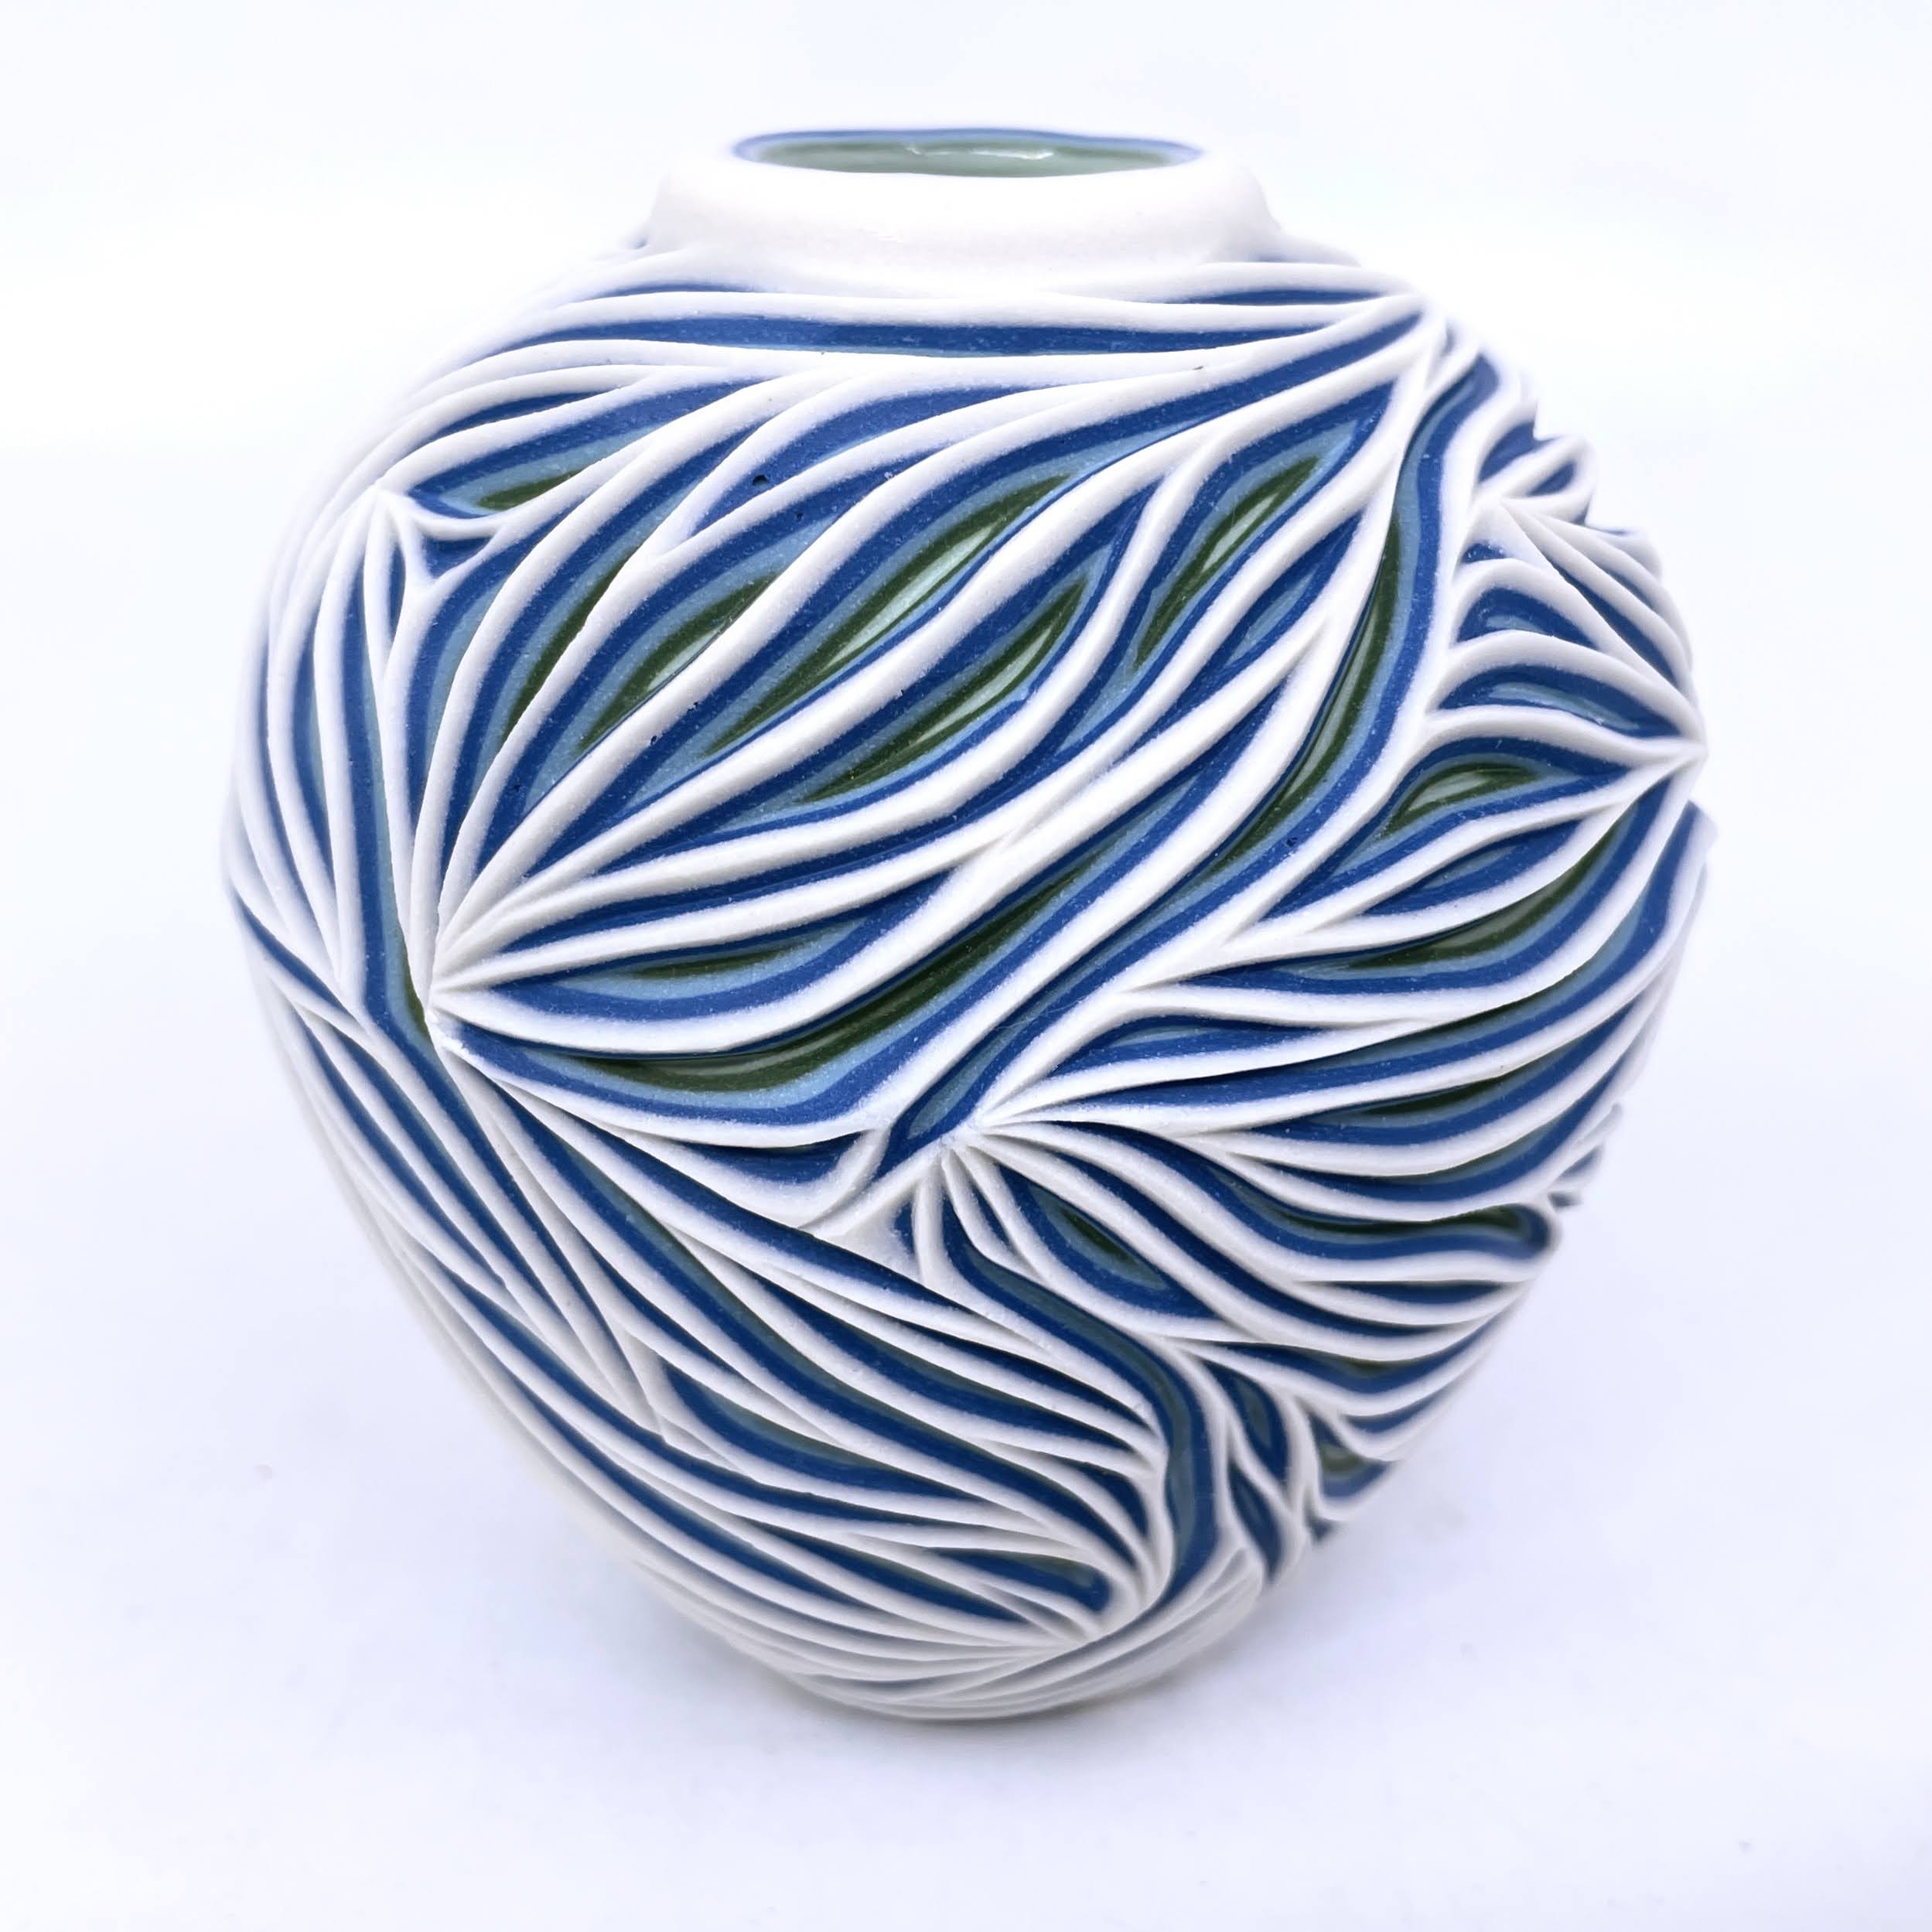 White to Bermuda 5-Layer Intricate Carved Bud Vase